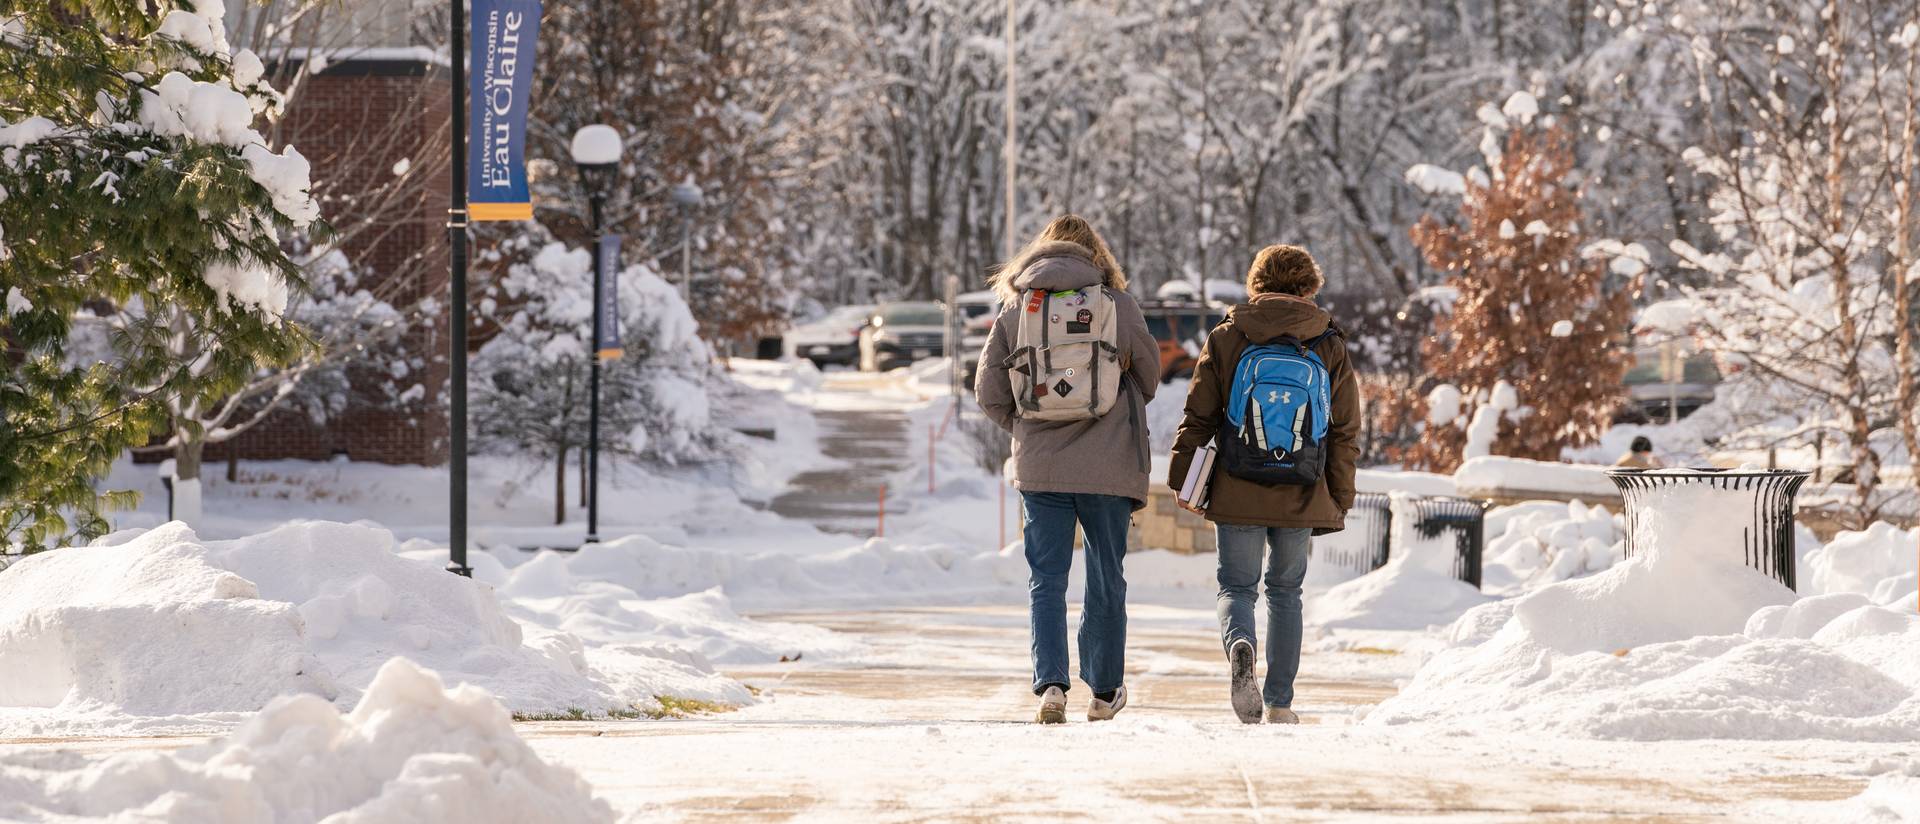 Two students walk through snow-covered campus with backpacks in tow.